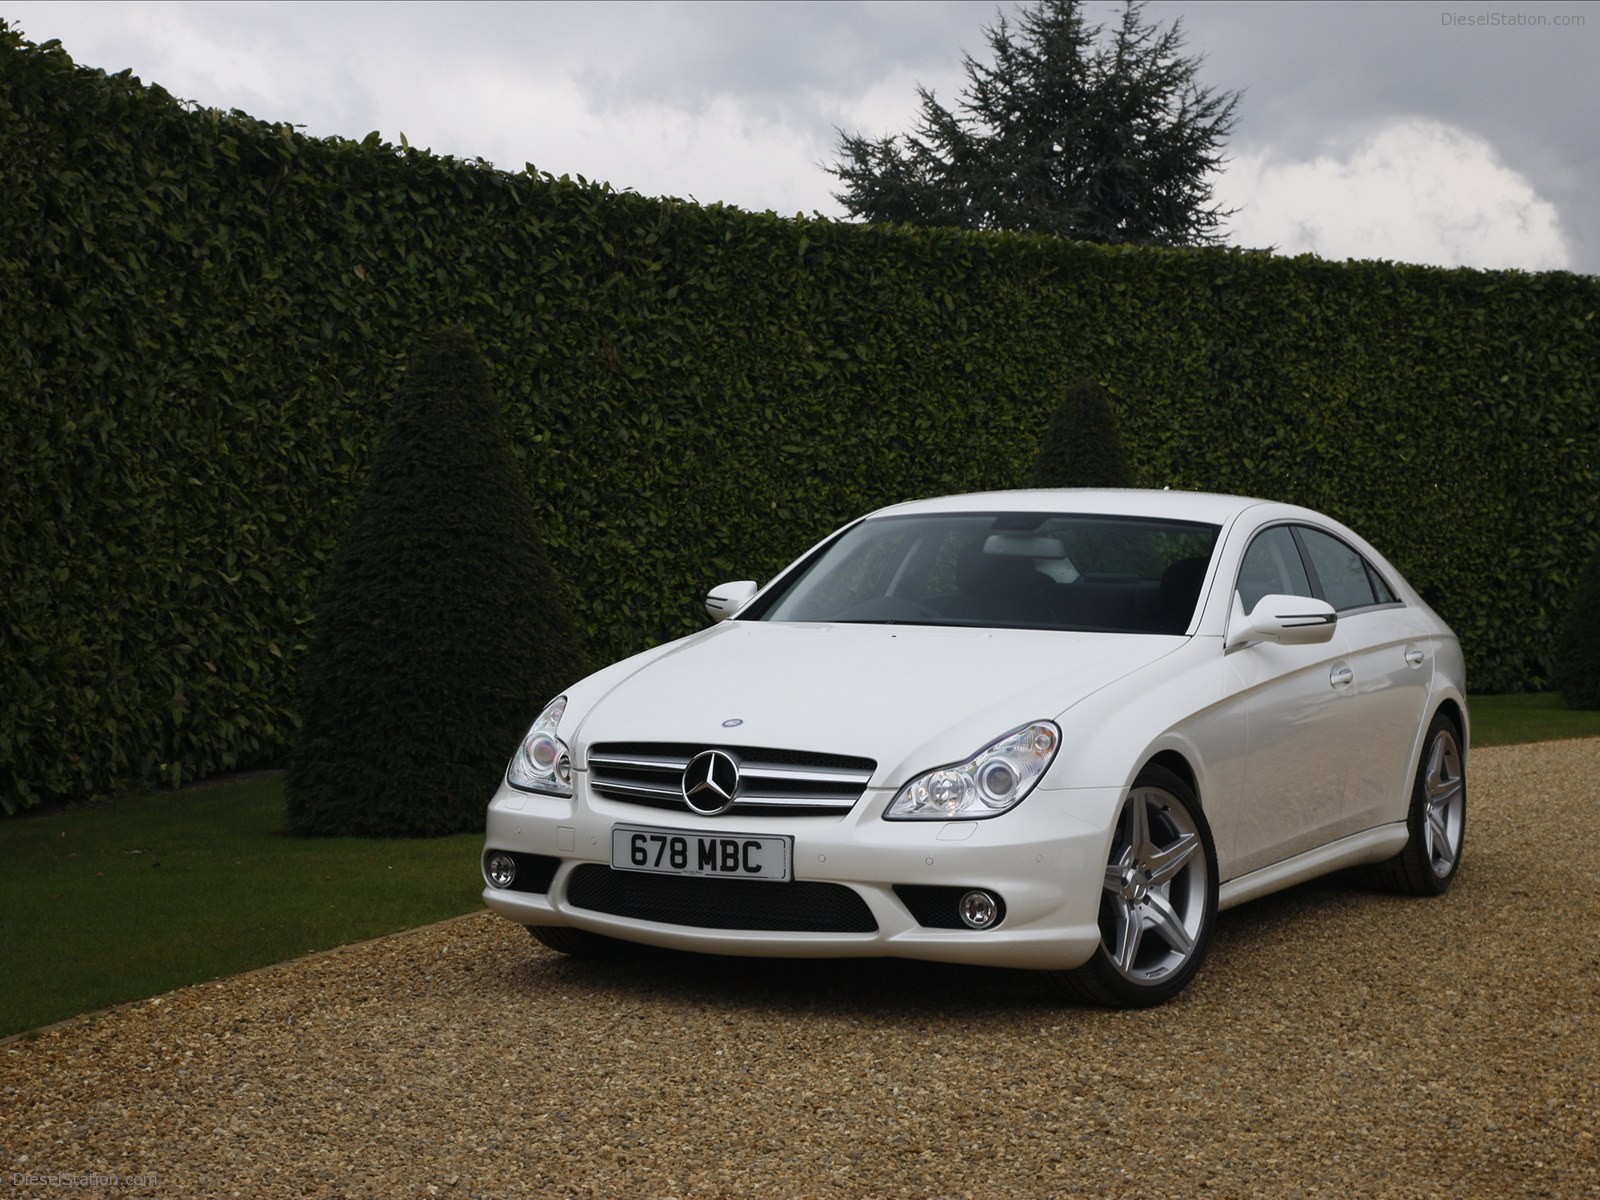 Mercedes Cls Class Exotic Car Picture Of